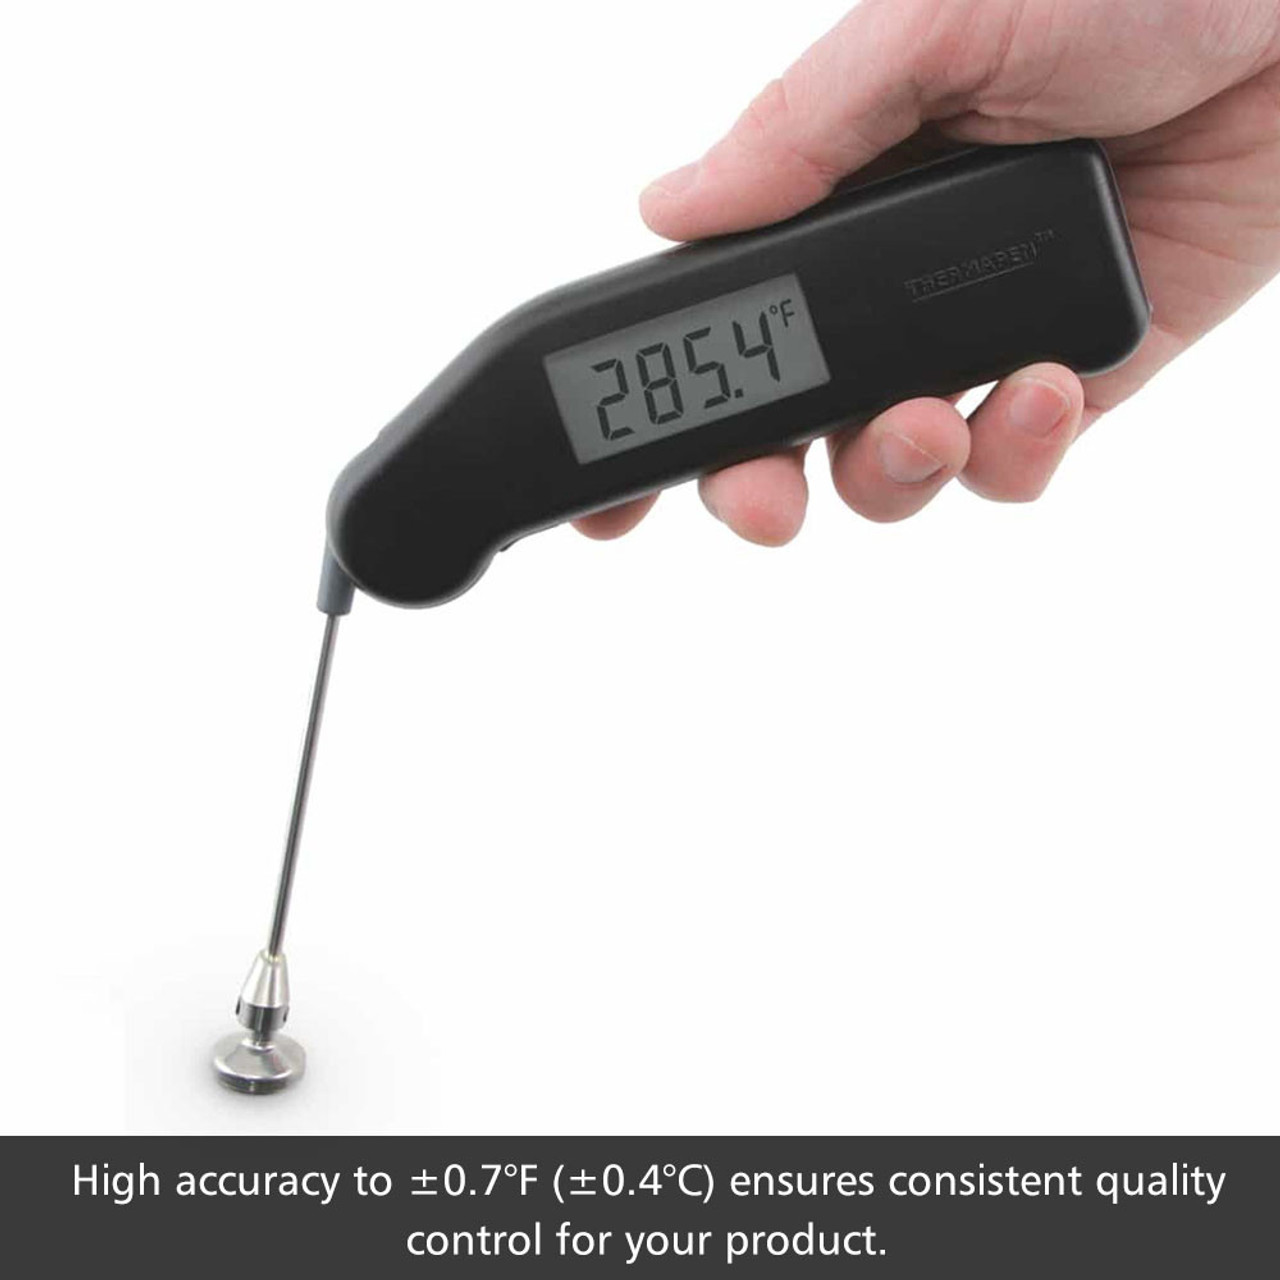 Griddle or Flat Top Grill Surface Thermometer 